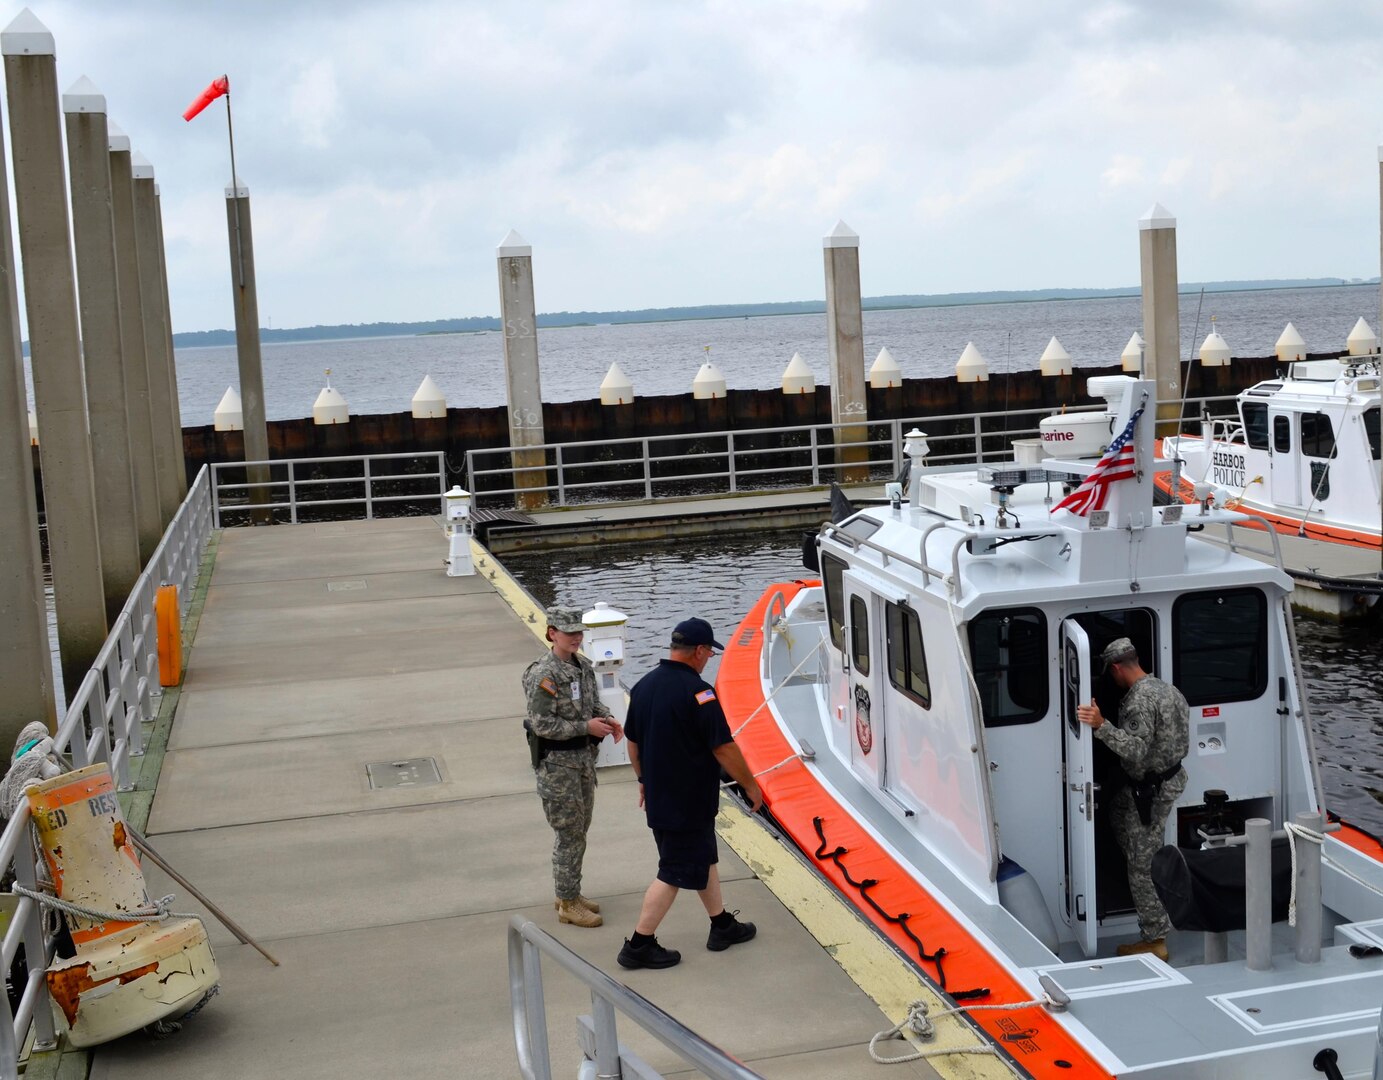 Members of the North Carolina National Guard’s 514th Military Police Company, based in Winterville, respond to simulated agitators trying to enter the port, during Operation Vigilant Seahawk at the Military Ocean Terminal Sunny Point (MOTSU). The exercise was designed to improve communication and coordination with state and federal partners during disaster response and recovery operations.